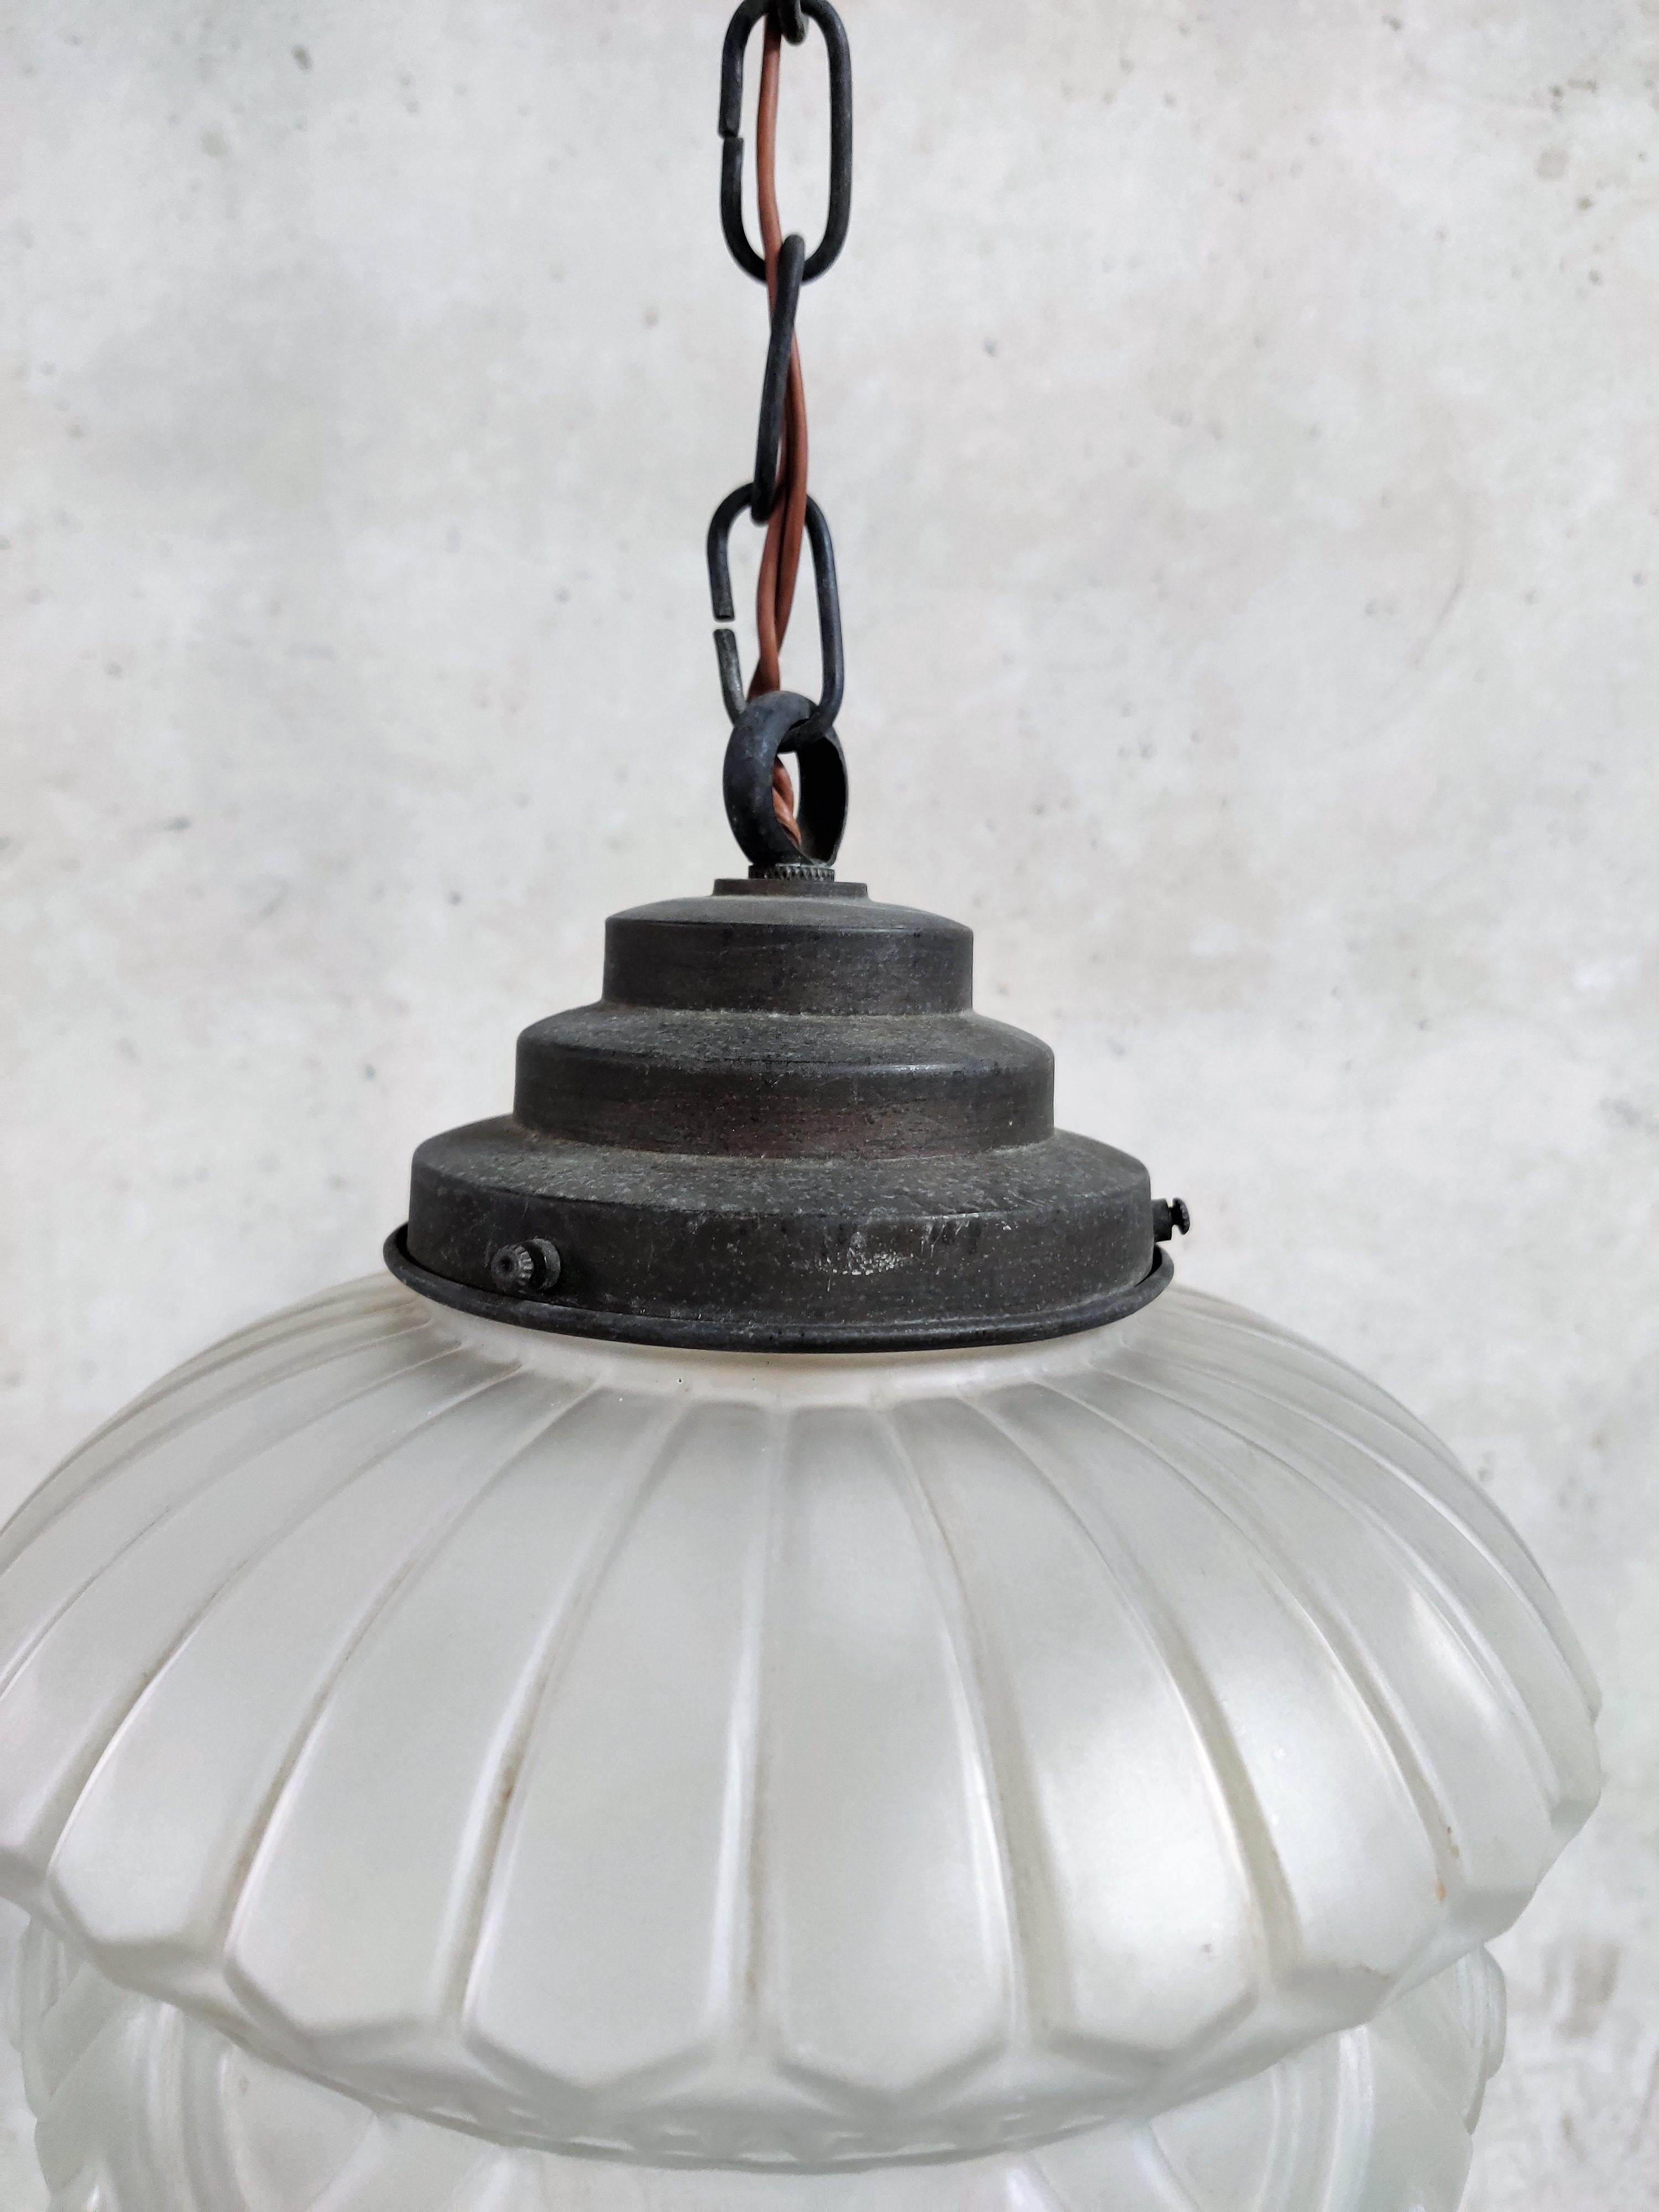 Antique decorated glass Art Deco pendant light with a copper shade holder.

Tested and ready for use with a regular E27 light bulb holder.

Dimensions:
Art Deco 
Height shade: 25cm/9.84